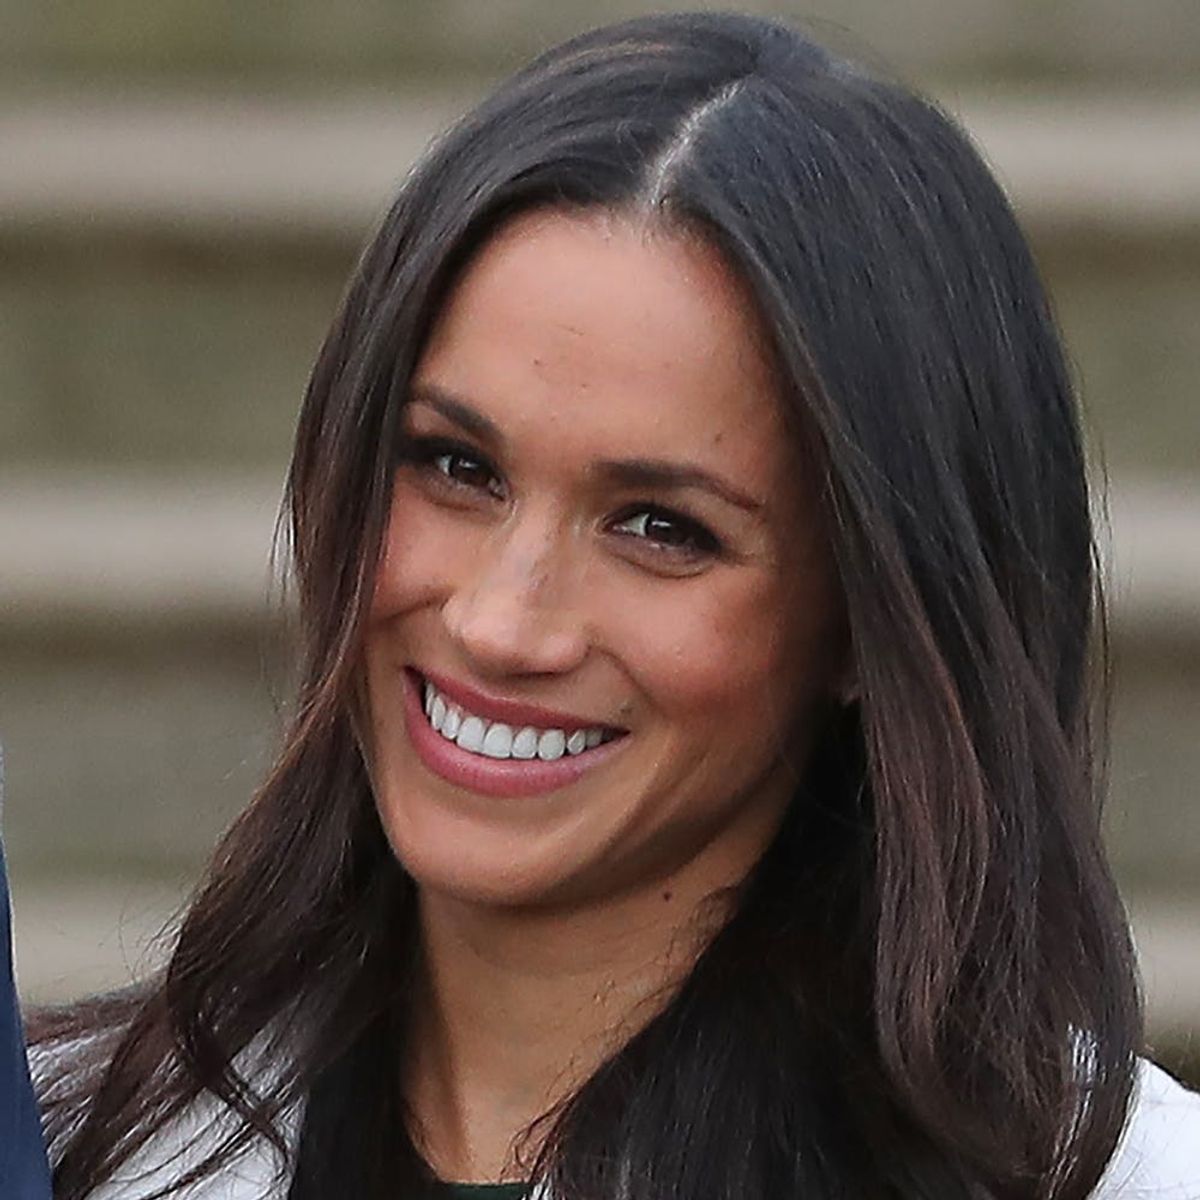 See What Meghan Markle Wore for Her First Engagement Photo Op With Prince Harry